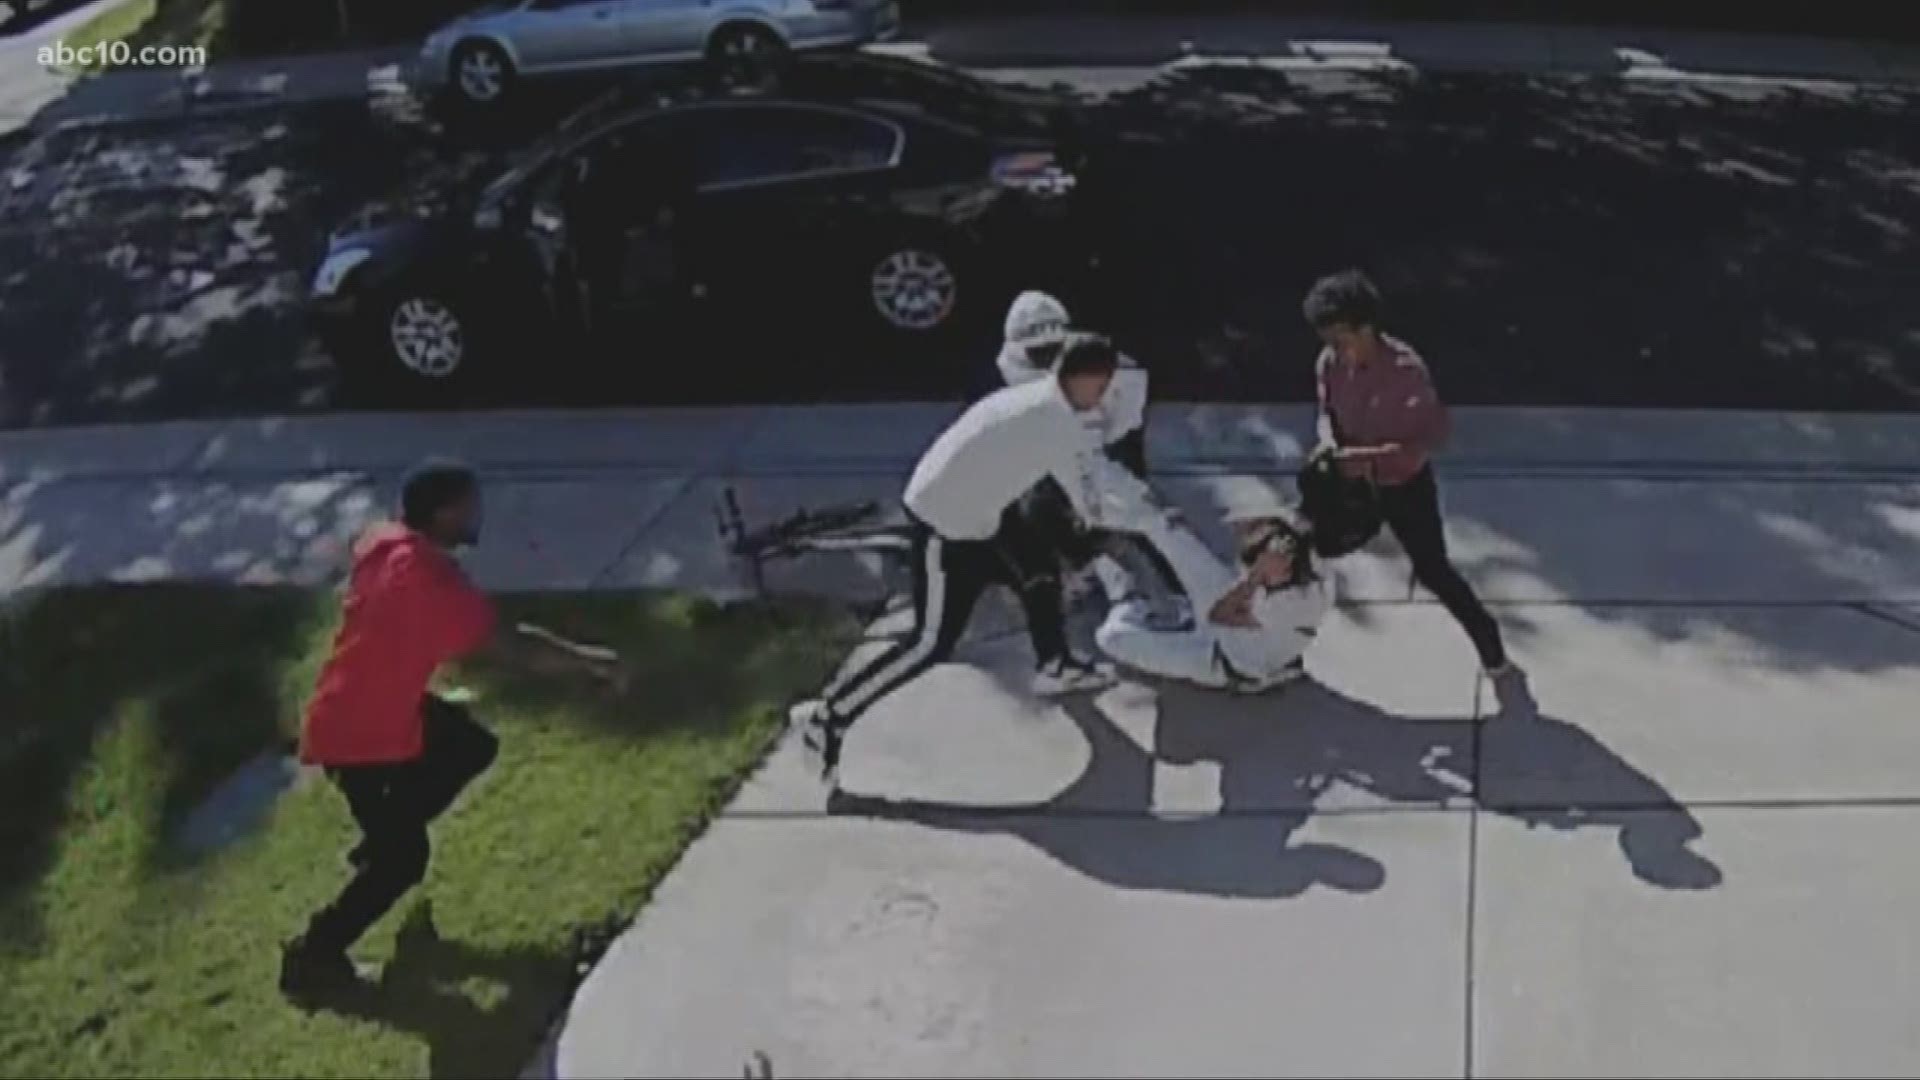 Four teenagers, all 16 and 17-year-olds, have been arrested for the violent robbery of a 12-year-old boy in Elk Grove over the weekend.